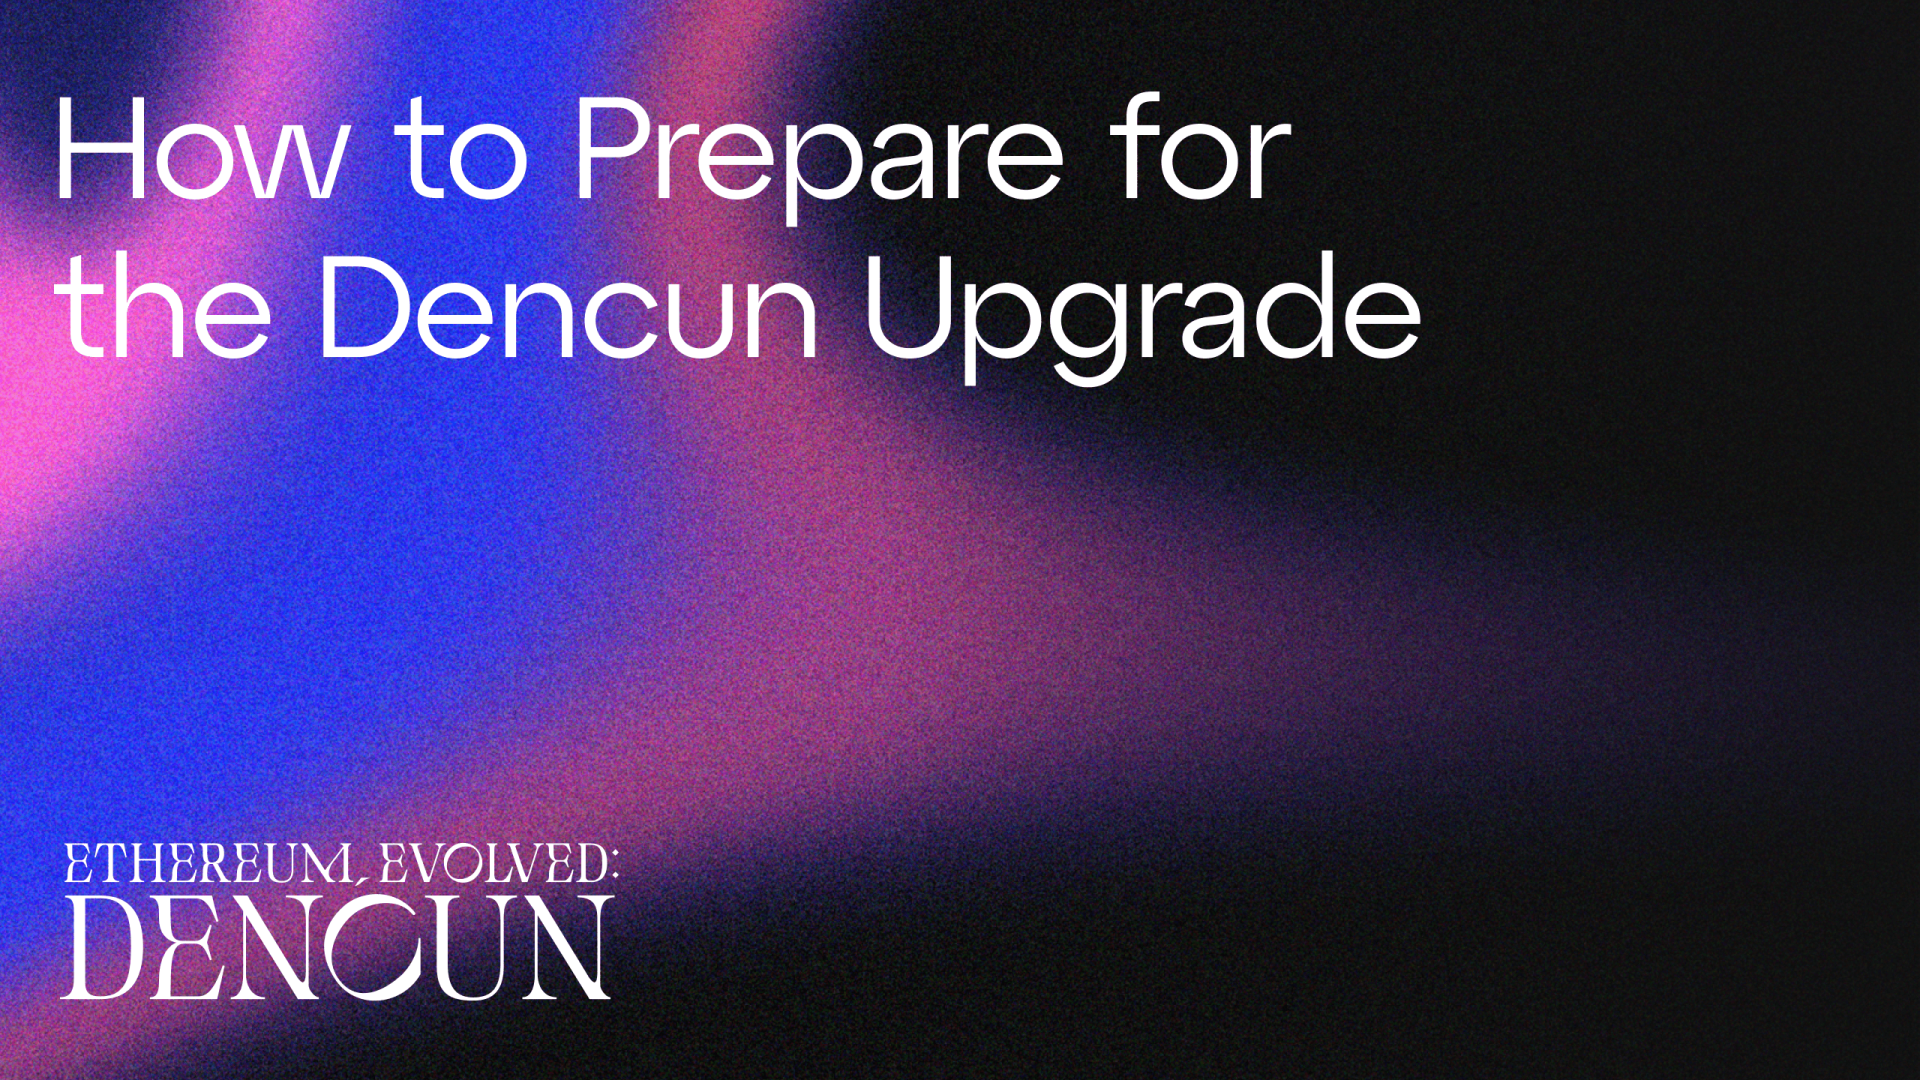 How to prepare for the Dencun Upgrade